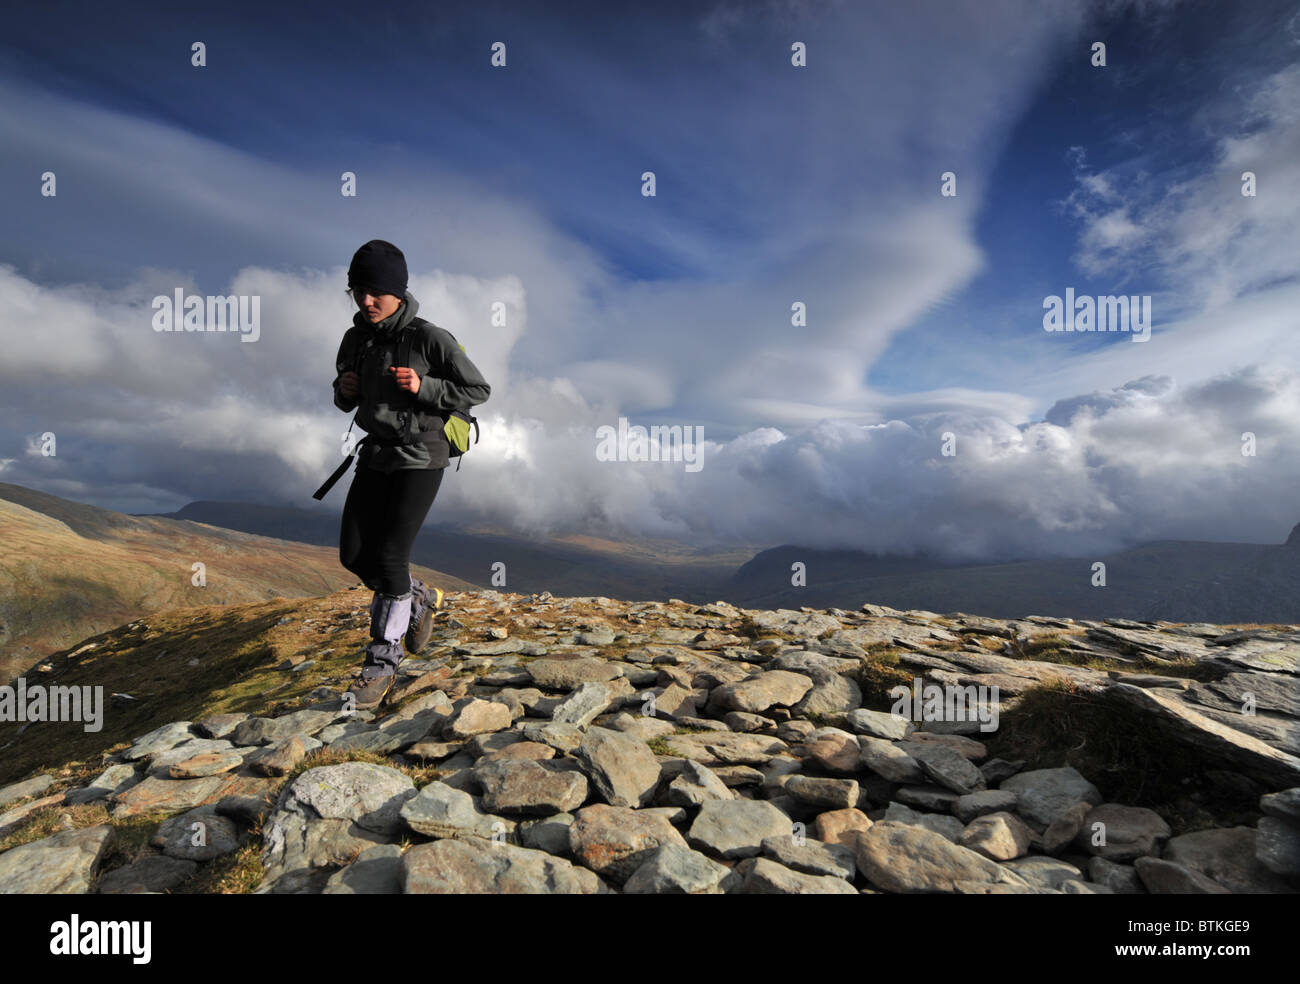 person walking in hills Stock Photo